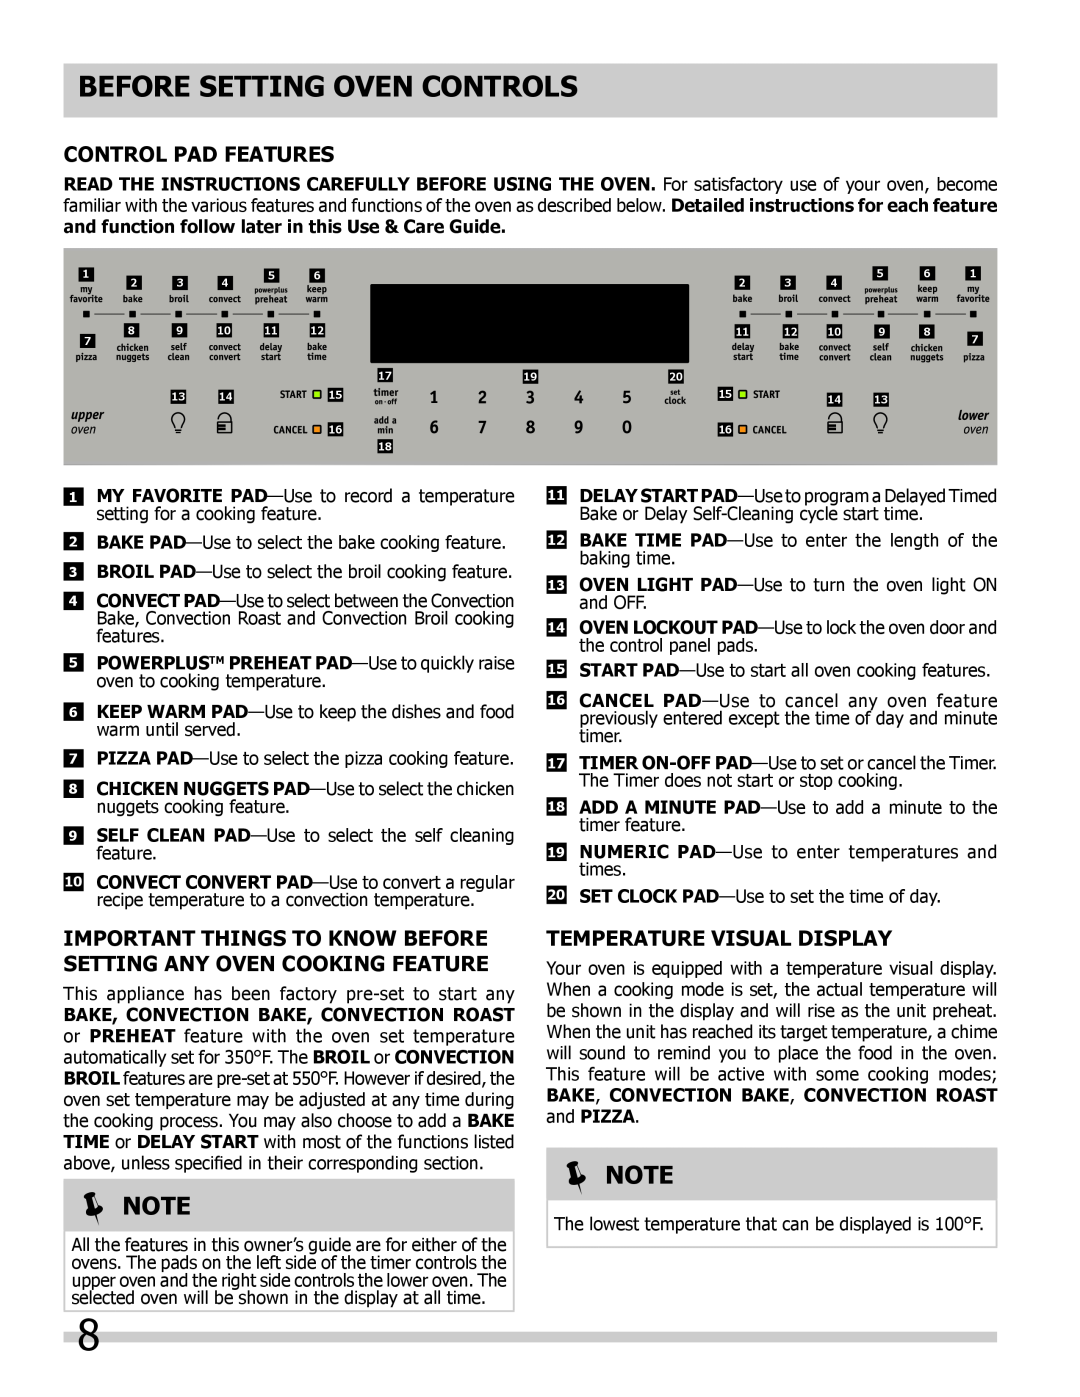 Frigidaire 318205307 BEFORE Setting OVEN controls, Control Pad Features, Temperature Visual Display,  Note 